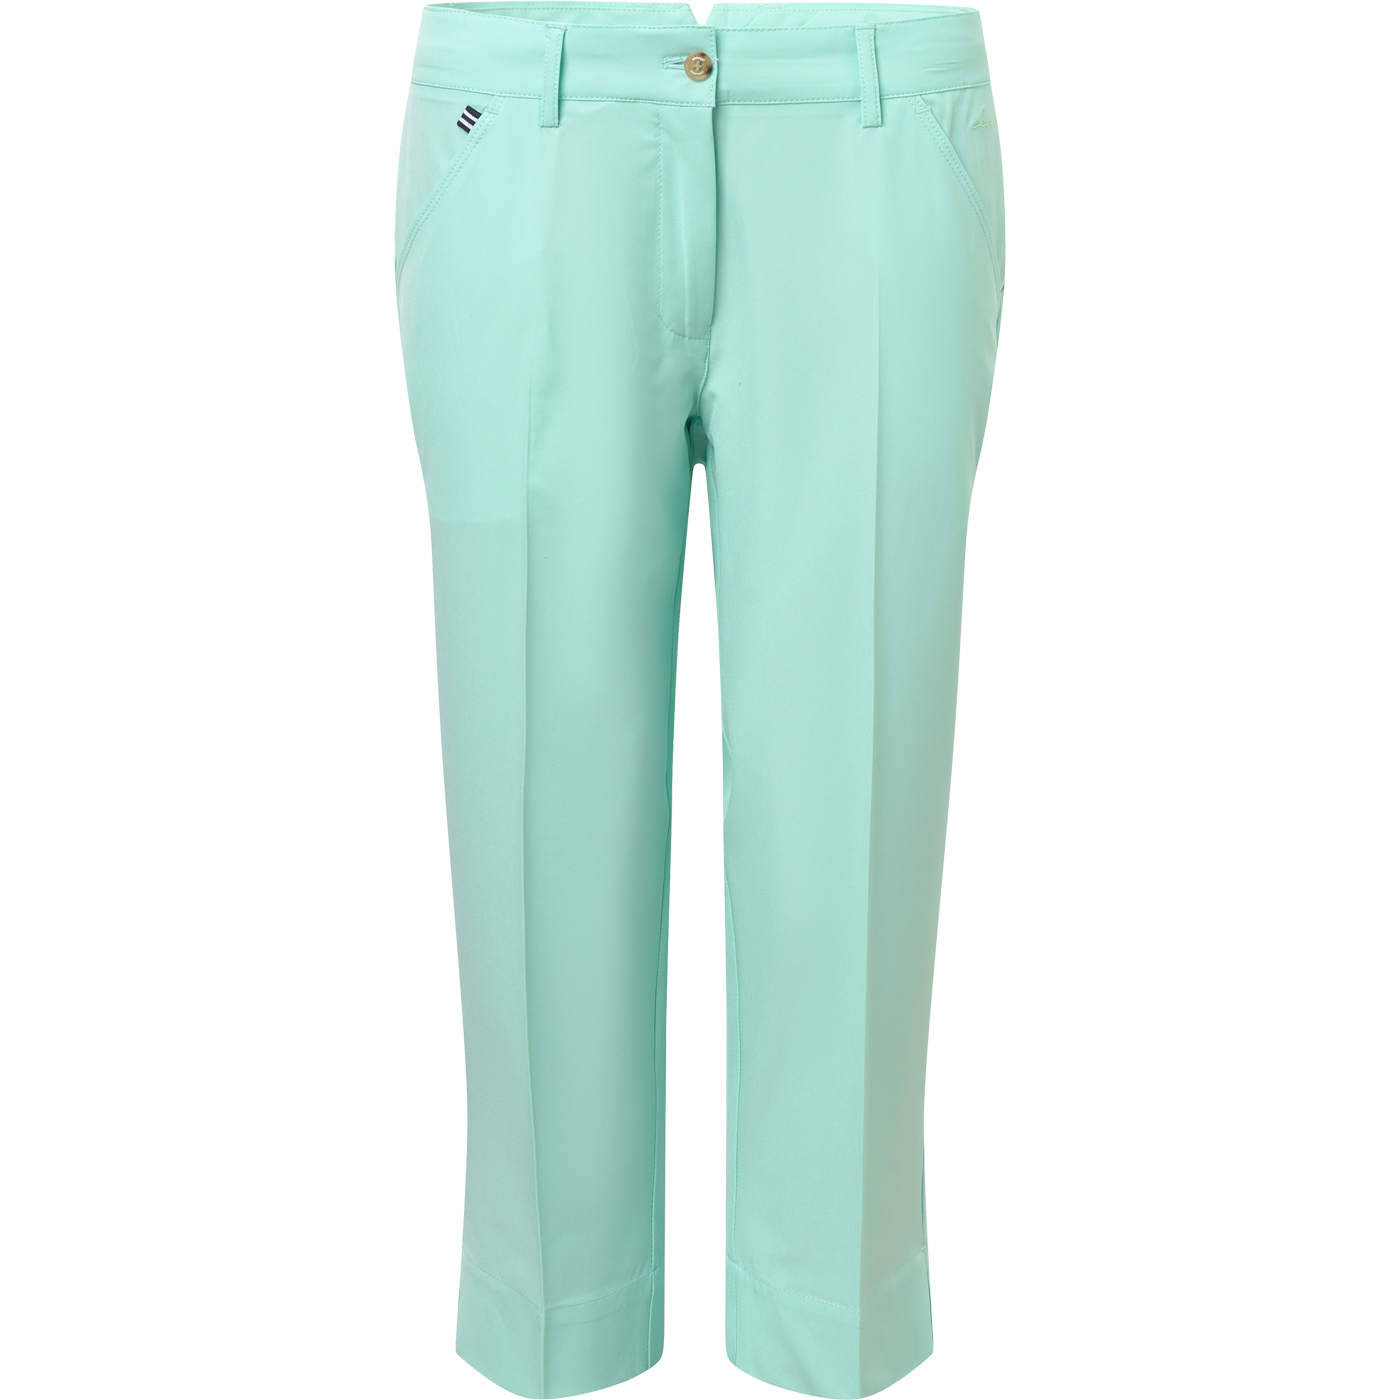 Lds Kildare capri - breeze in the group WOMEN / All clothing at Abacus Sportswear (2979343)